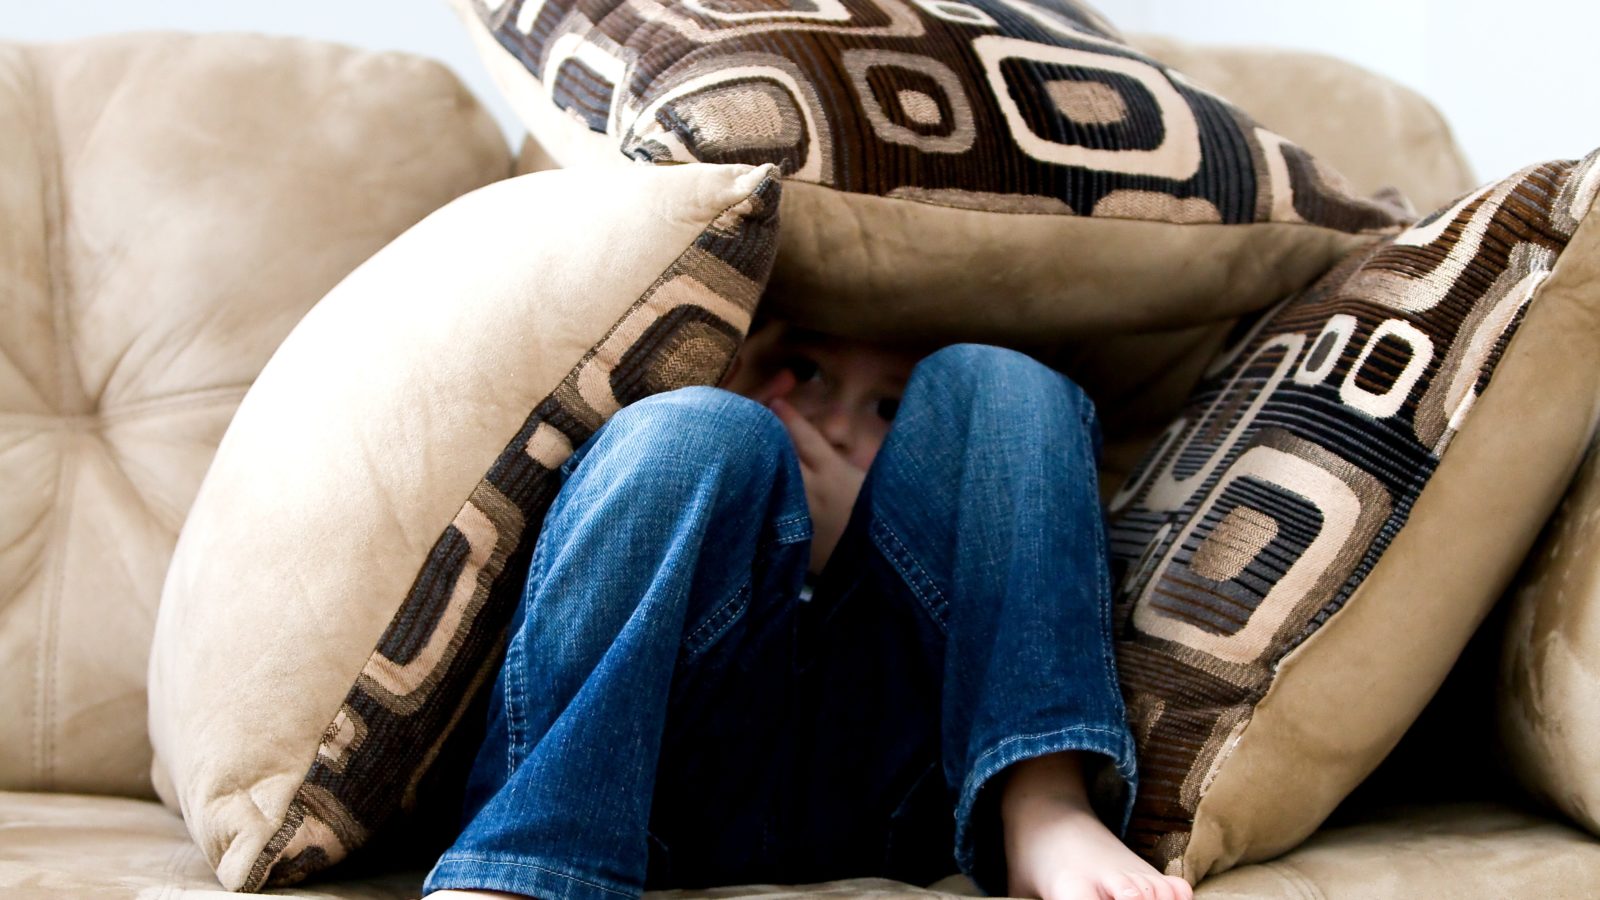 Child hiding under pillows representing parental alienation during a high-conflict divorce or separation